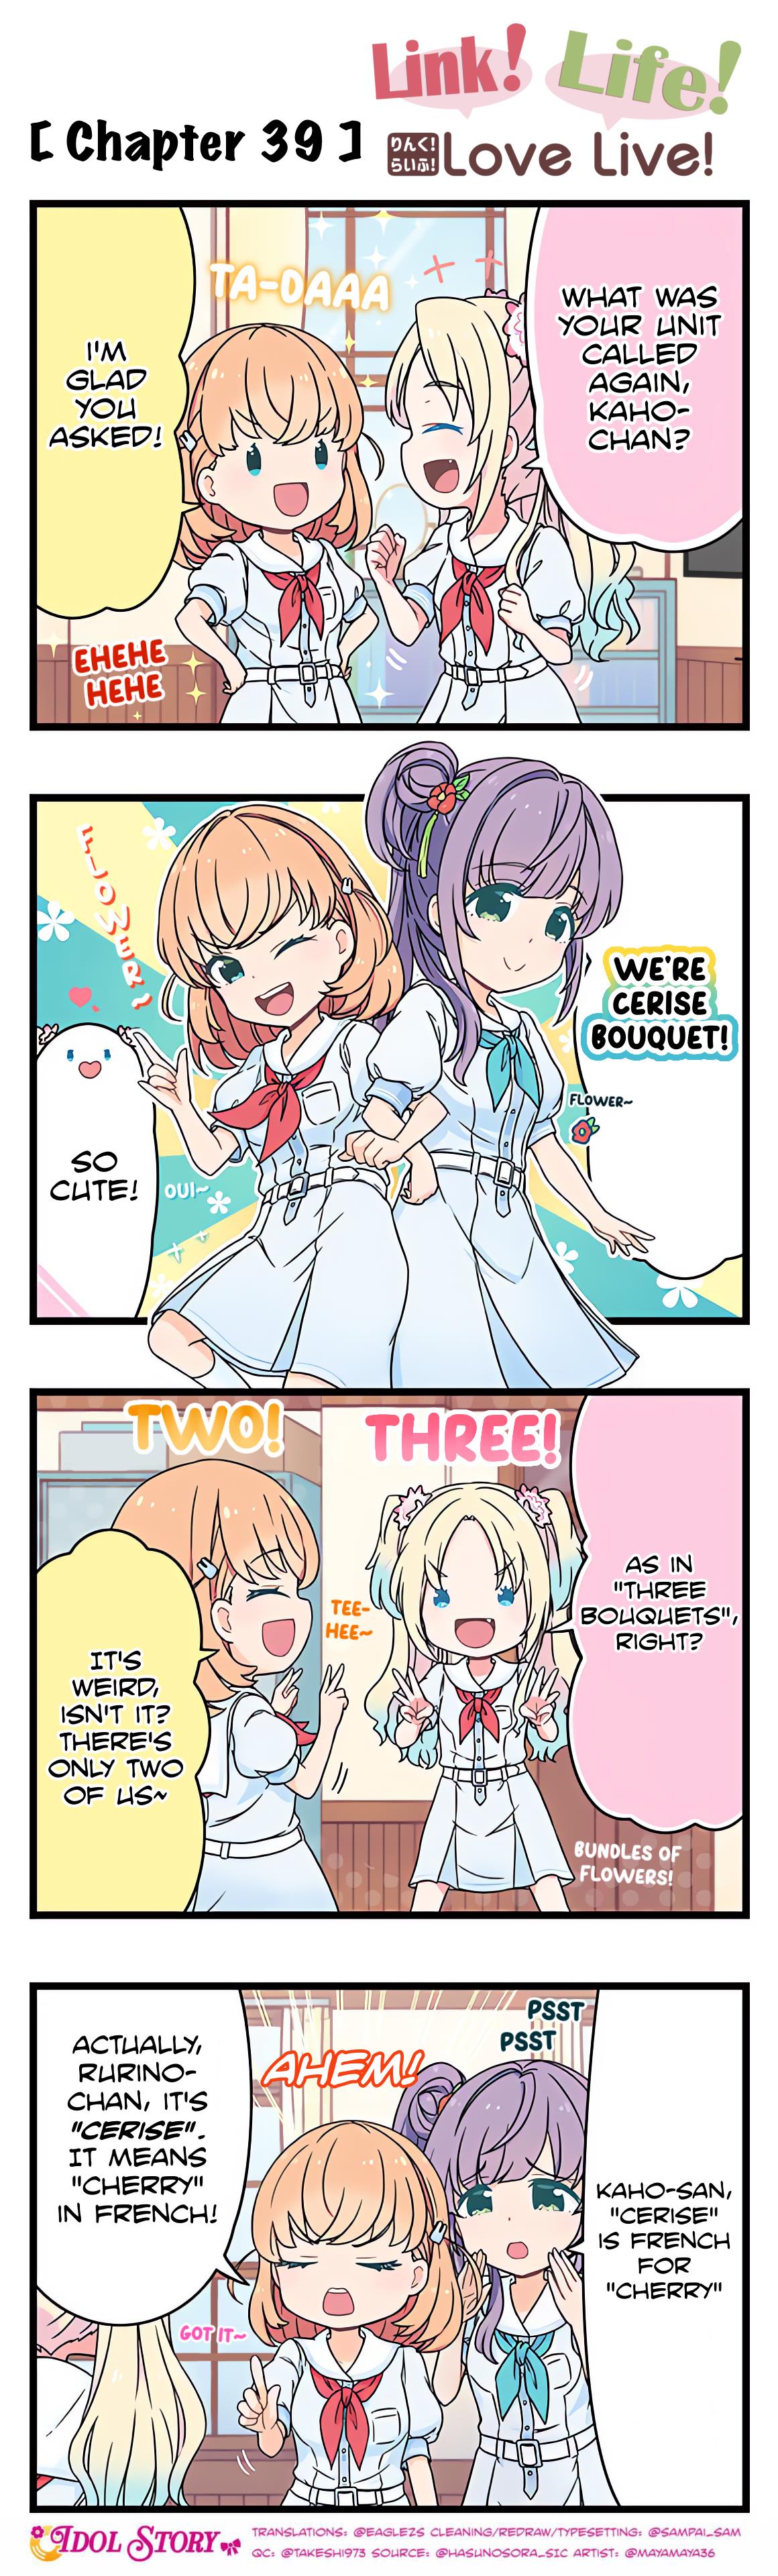 Link! Life! Love Live! Chapter 39 #1